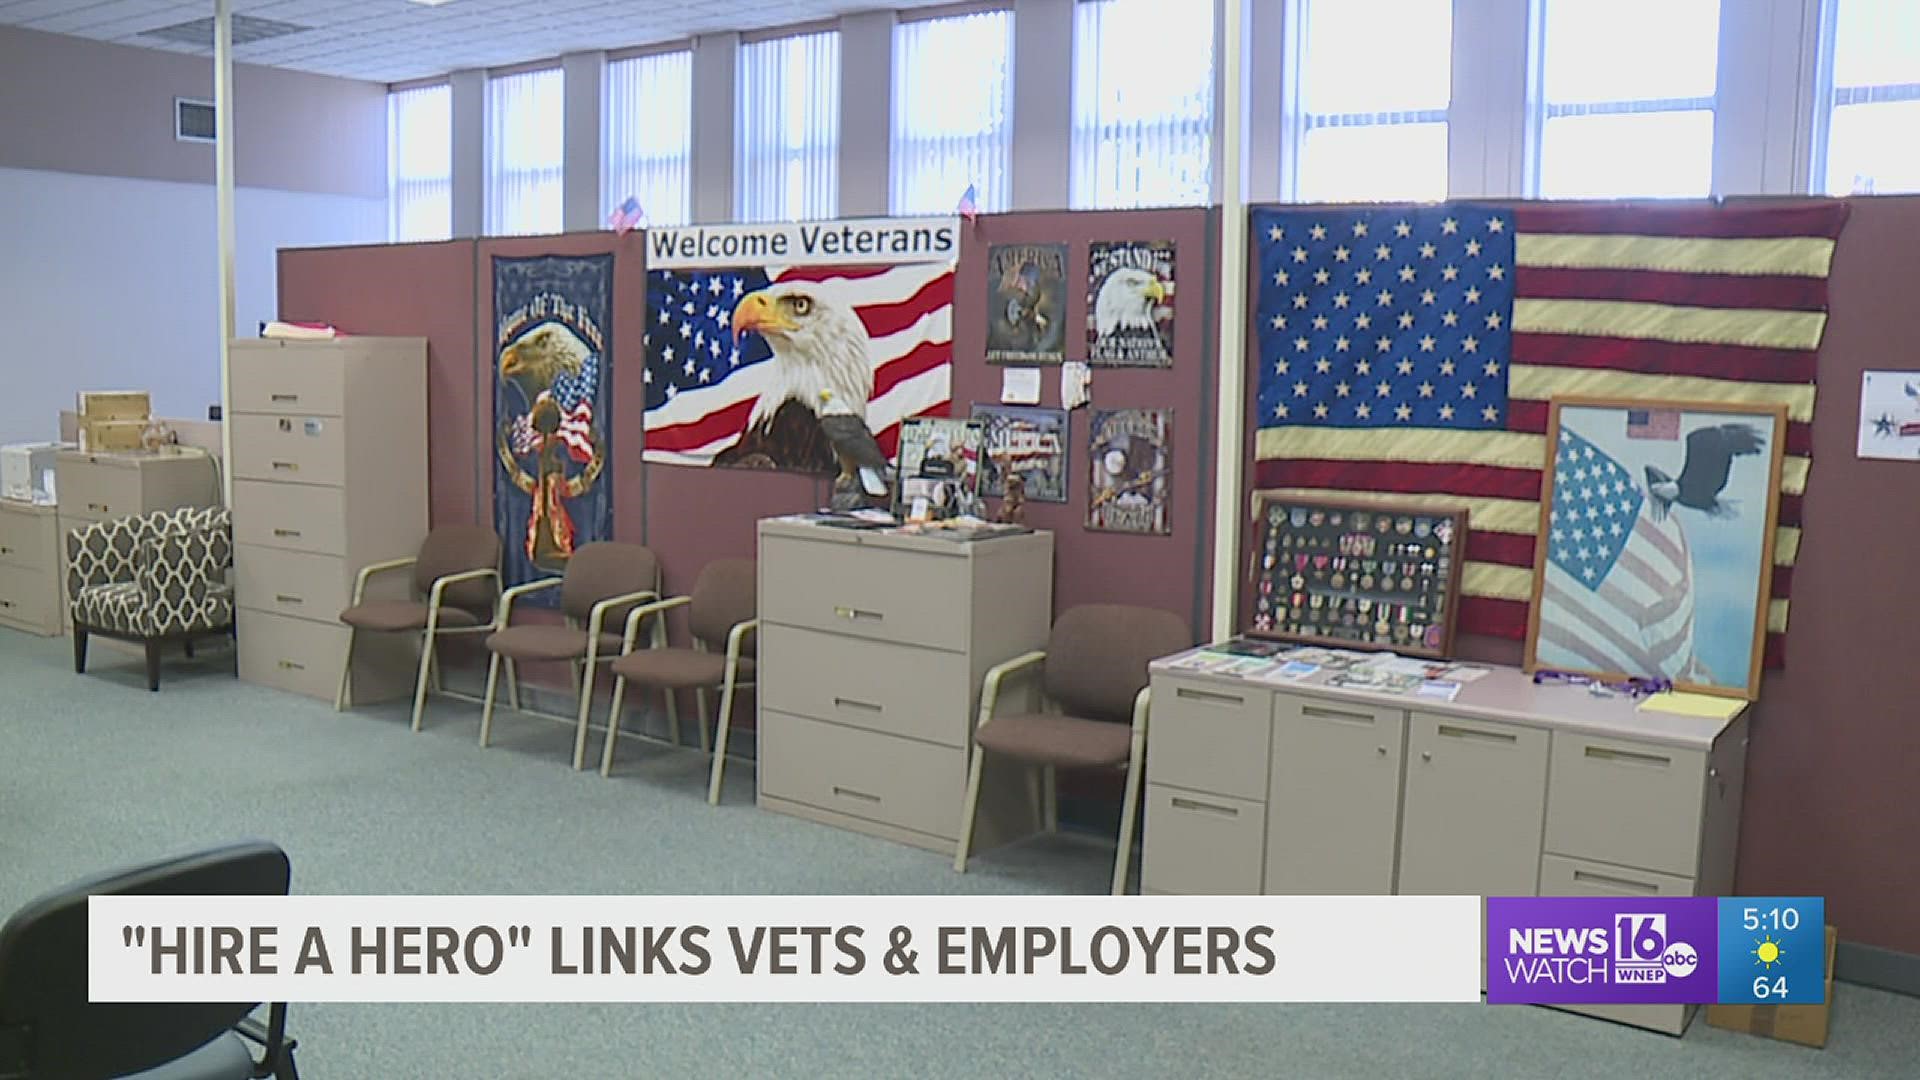 On Tuesday in Scranton, there were job offers for former military members looking for work.